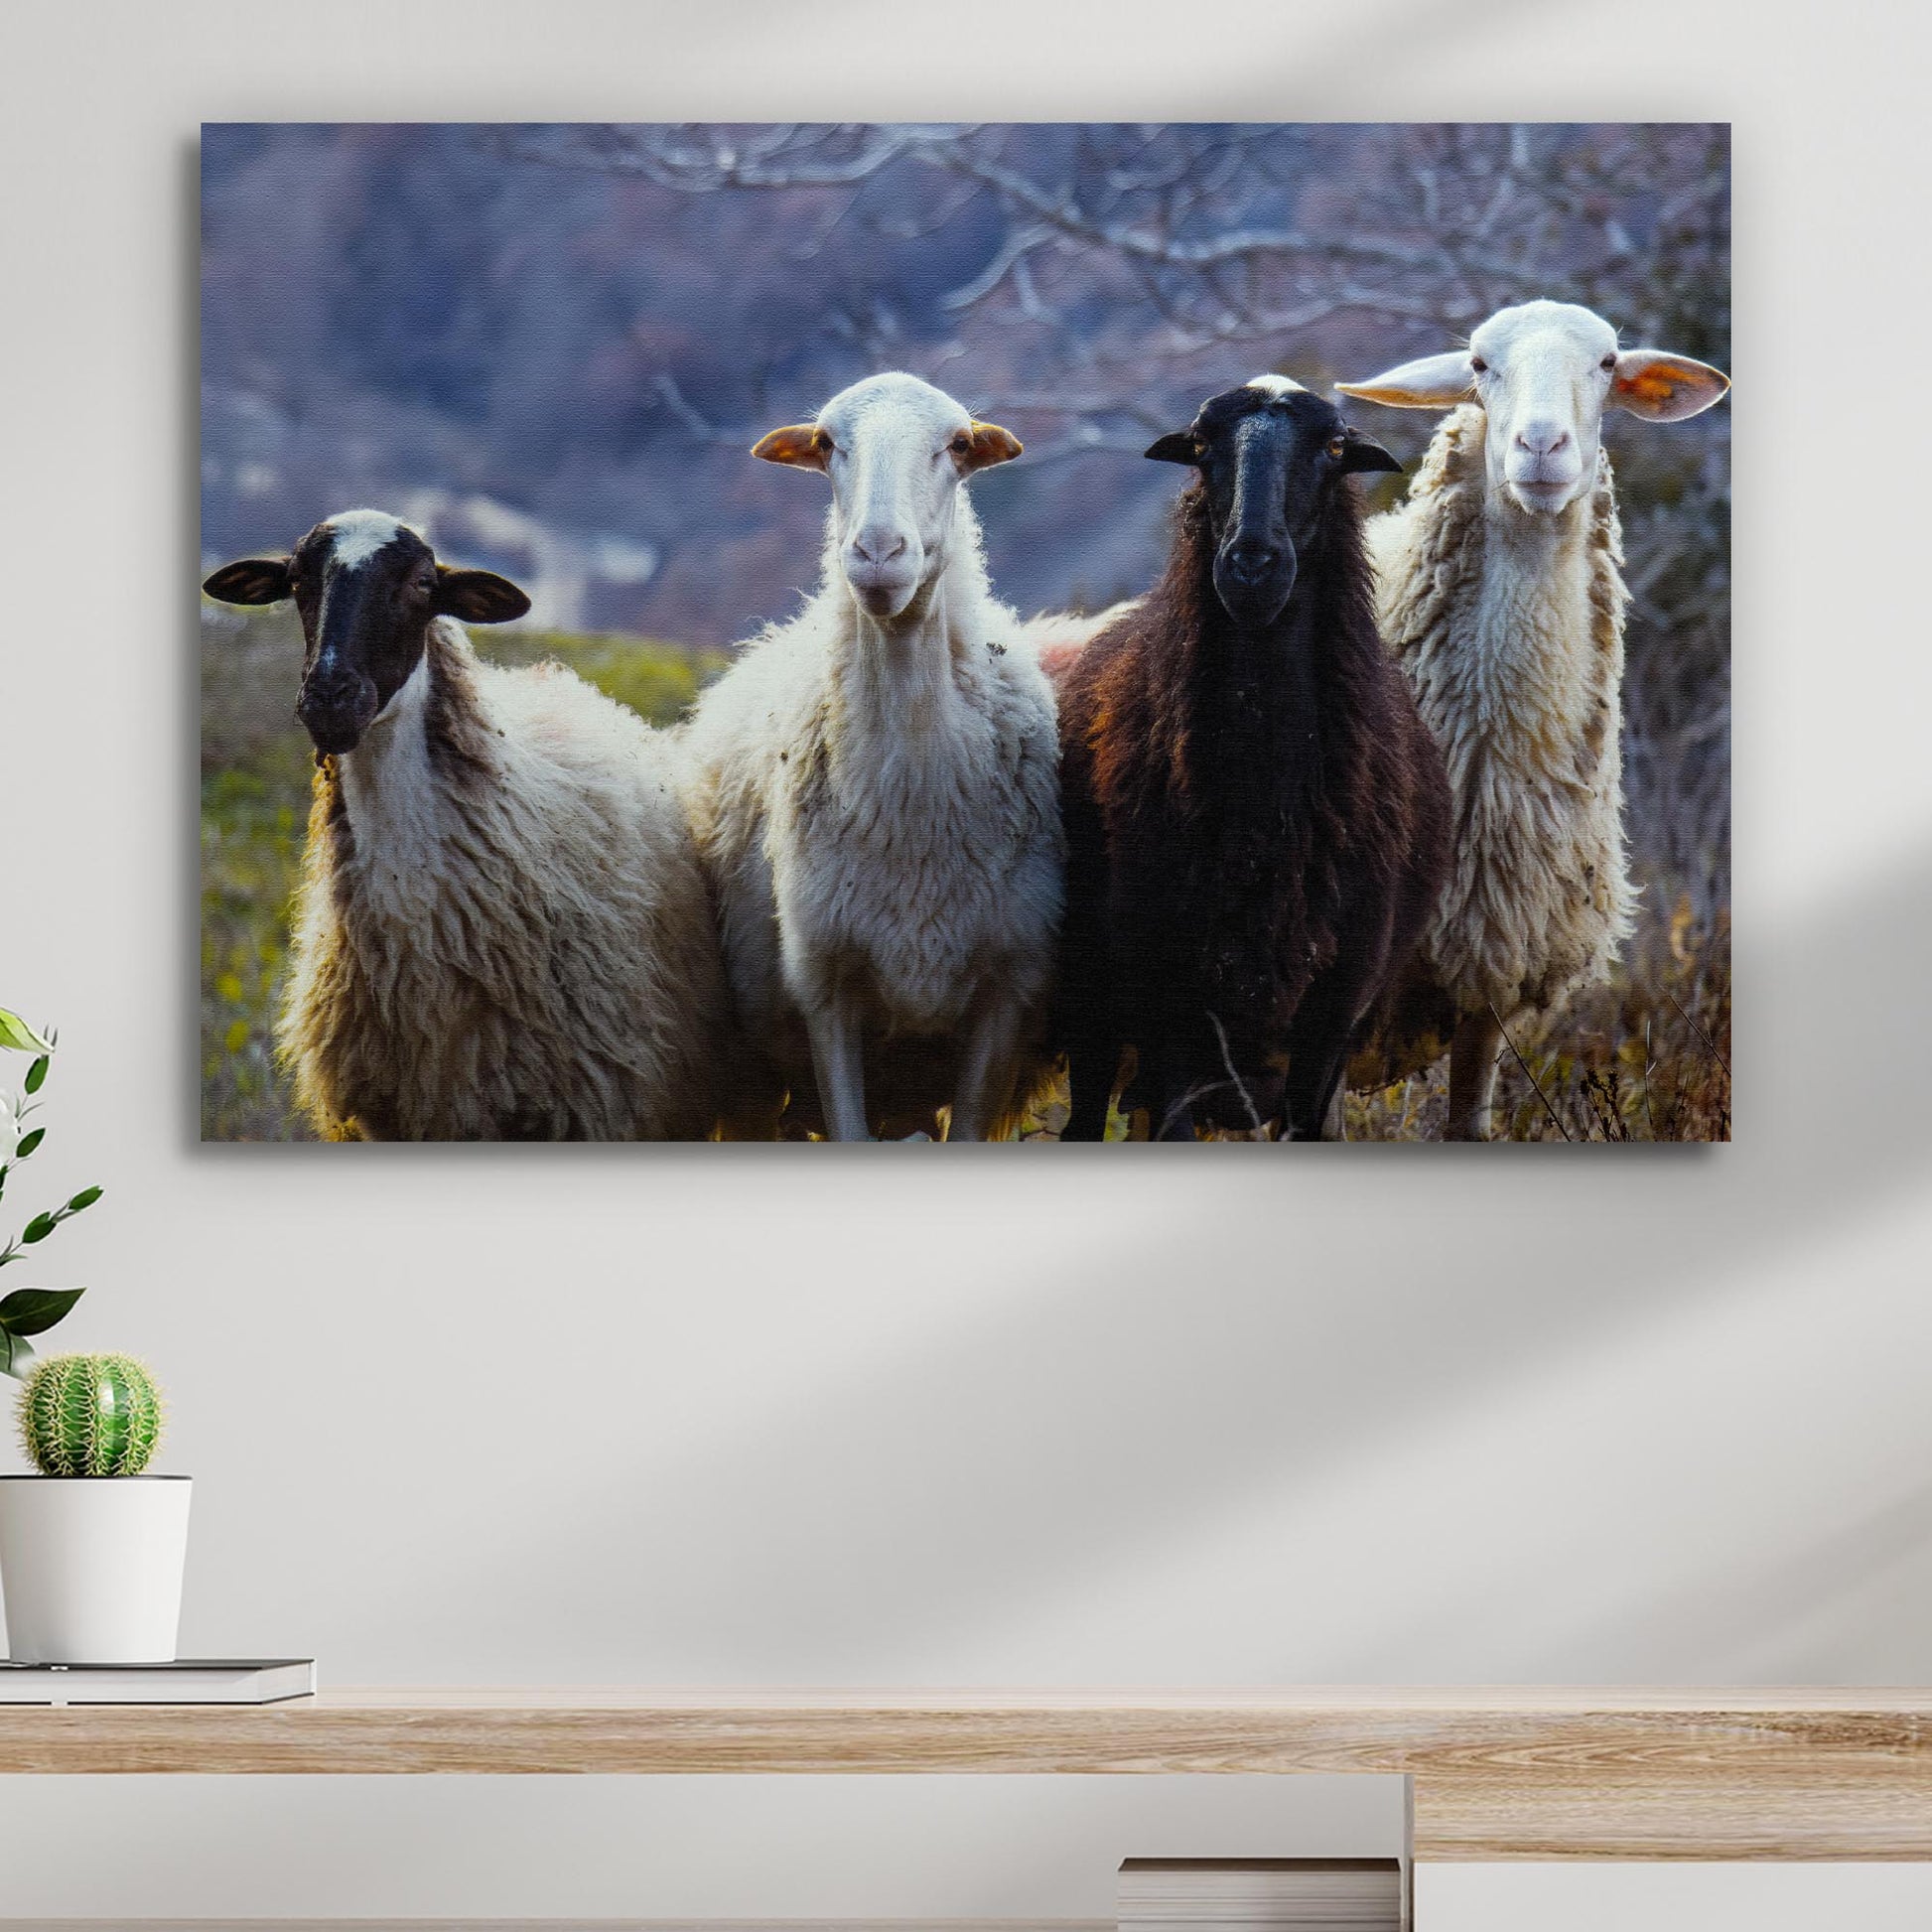 Country Sheep Canvas Wall Art - Image by Tailored Canvases